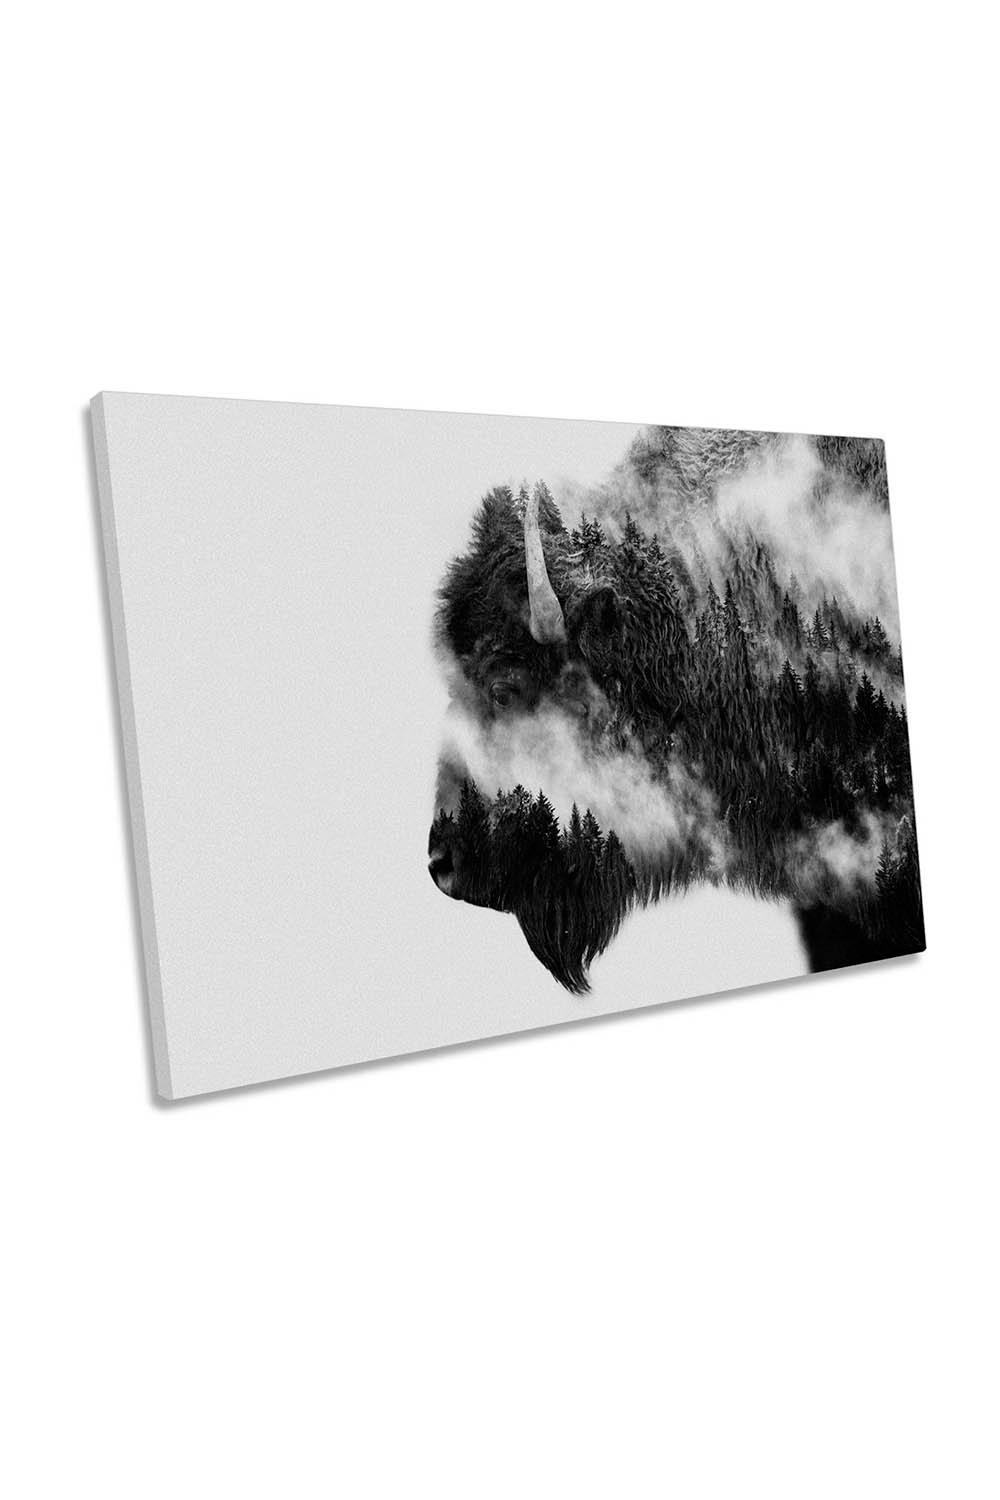 Bison Modern Double Exposure Canvas Wall Art Picture Print